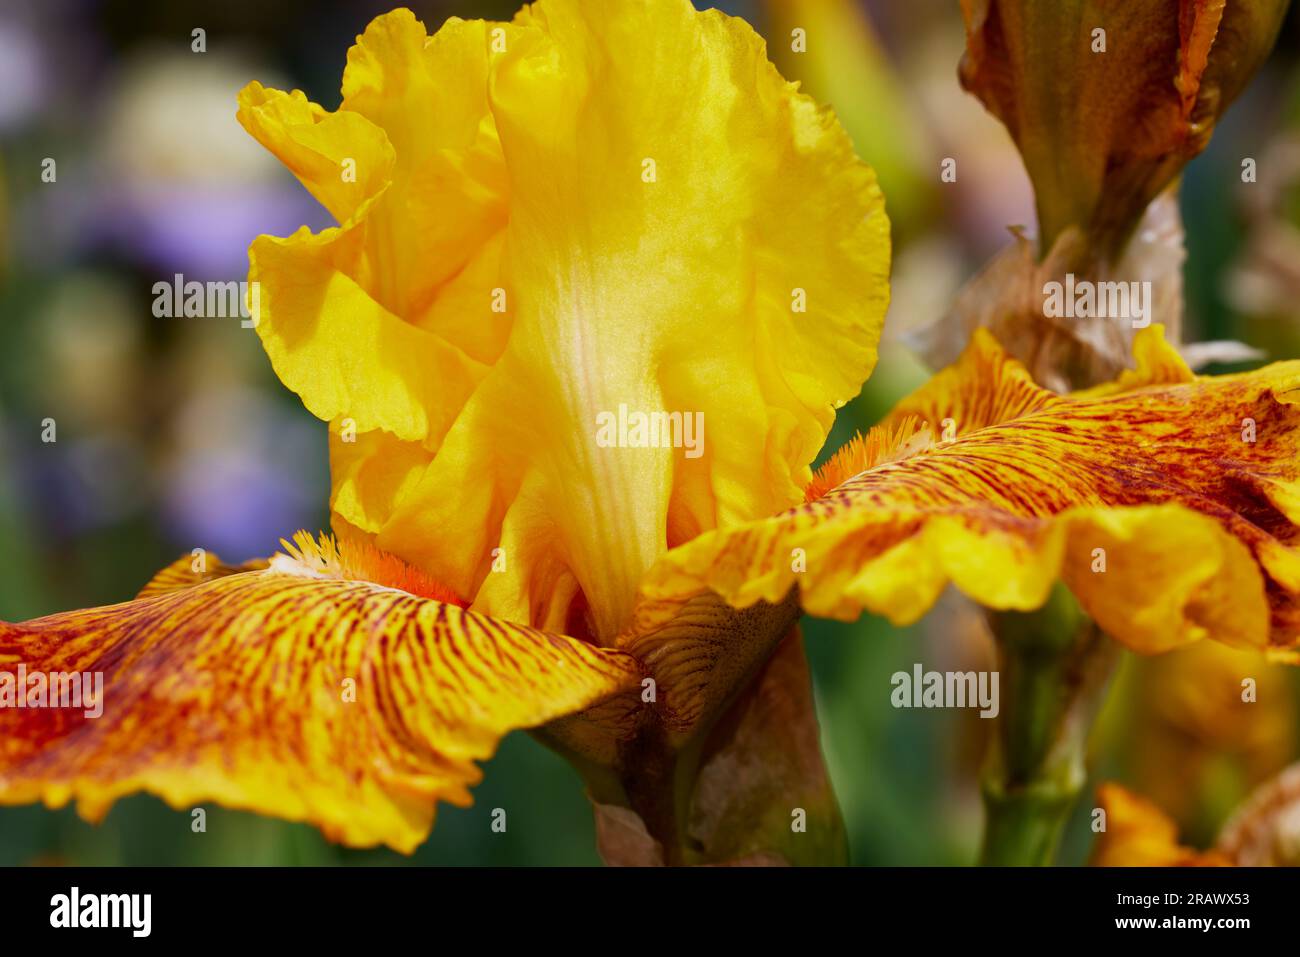 Close up of a Calizona Gold Iris Flower with Shallow depth of Field Stock Photo